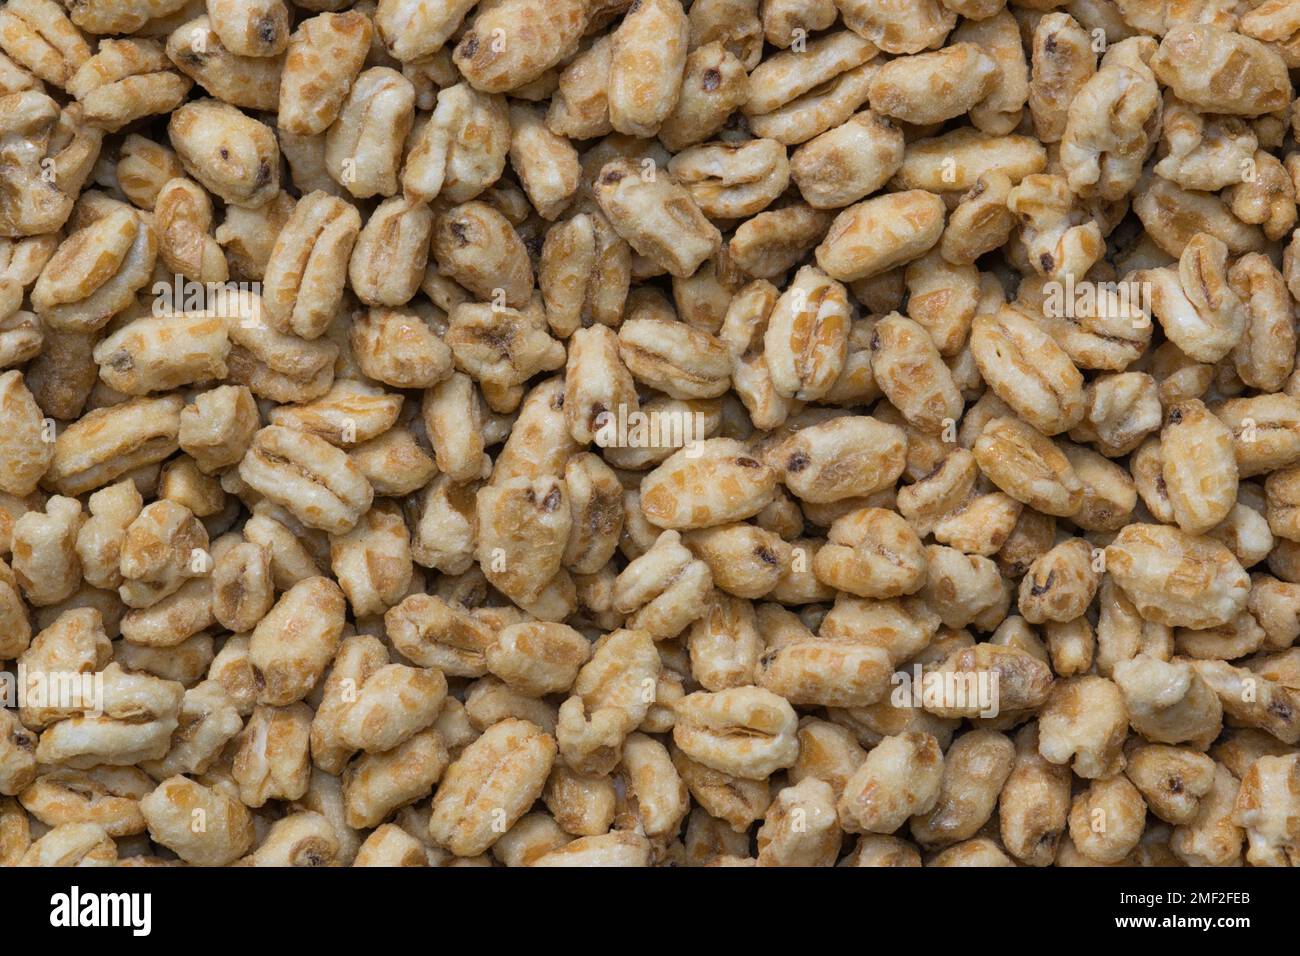 Dry honey puffed wheat cereal pieces scattered loosely directly above. Breakfast foods textured background, full frame image. Stock Photo